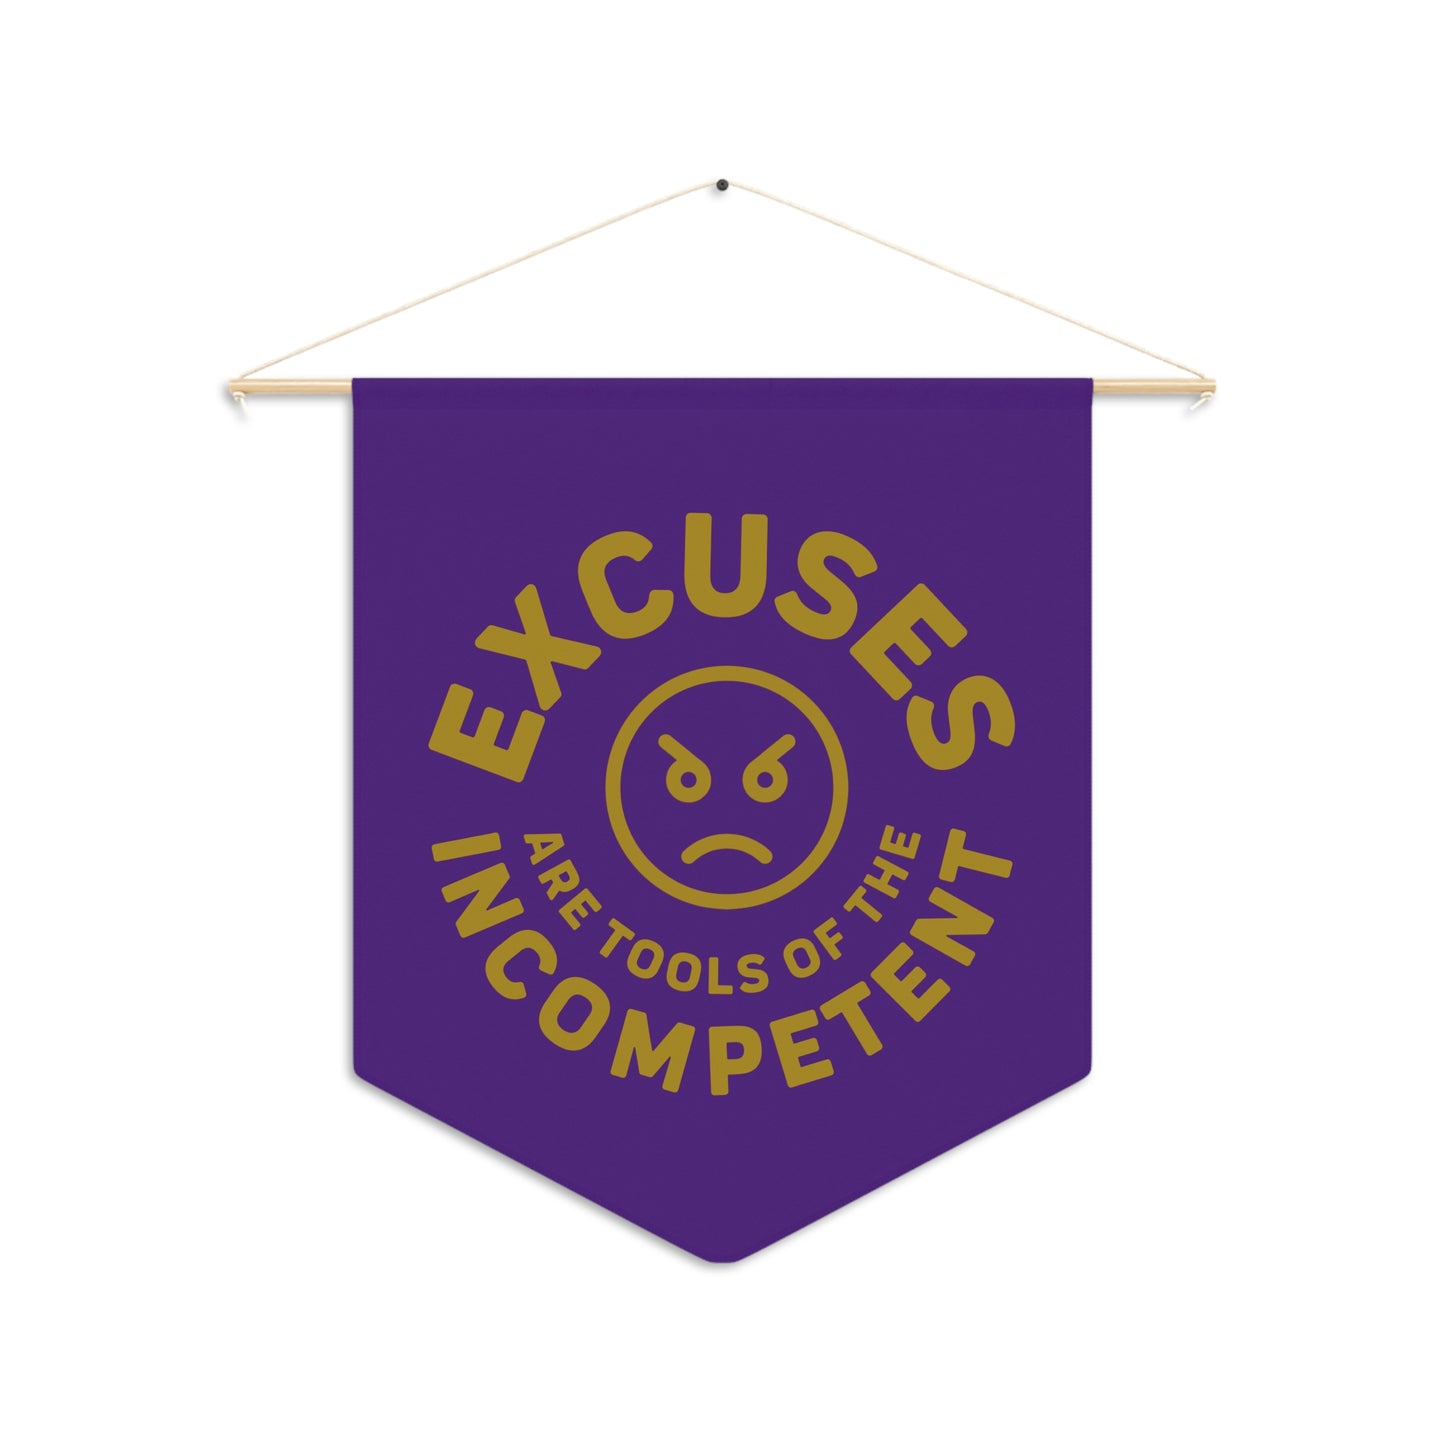 Excuses Pennant - Gold on Purple